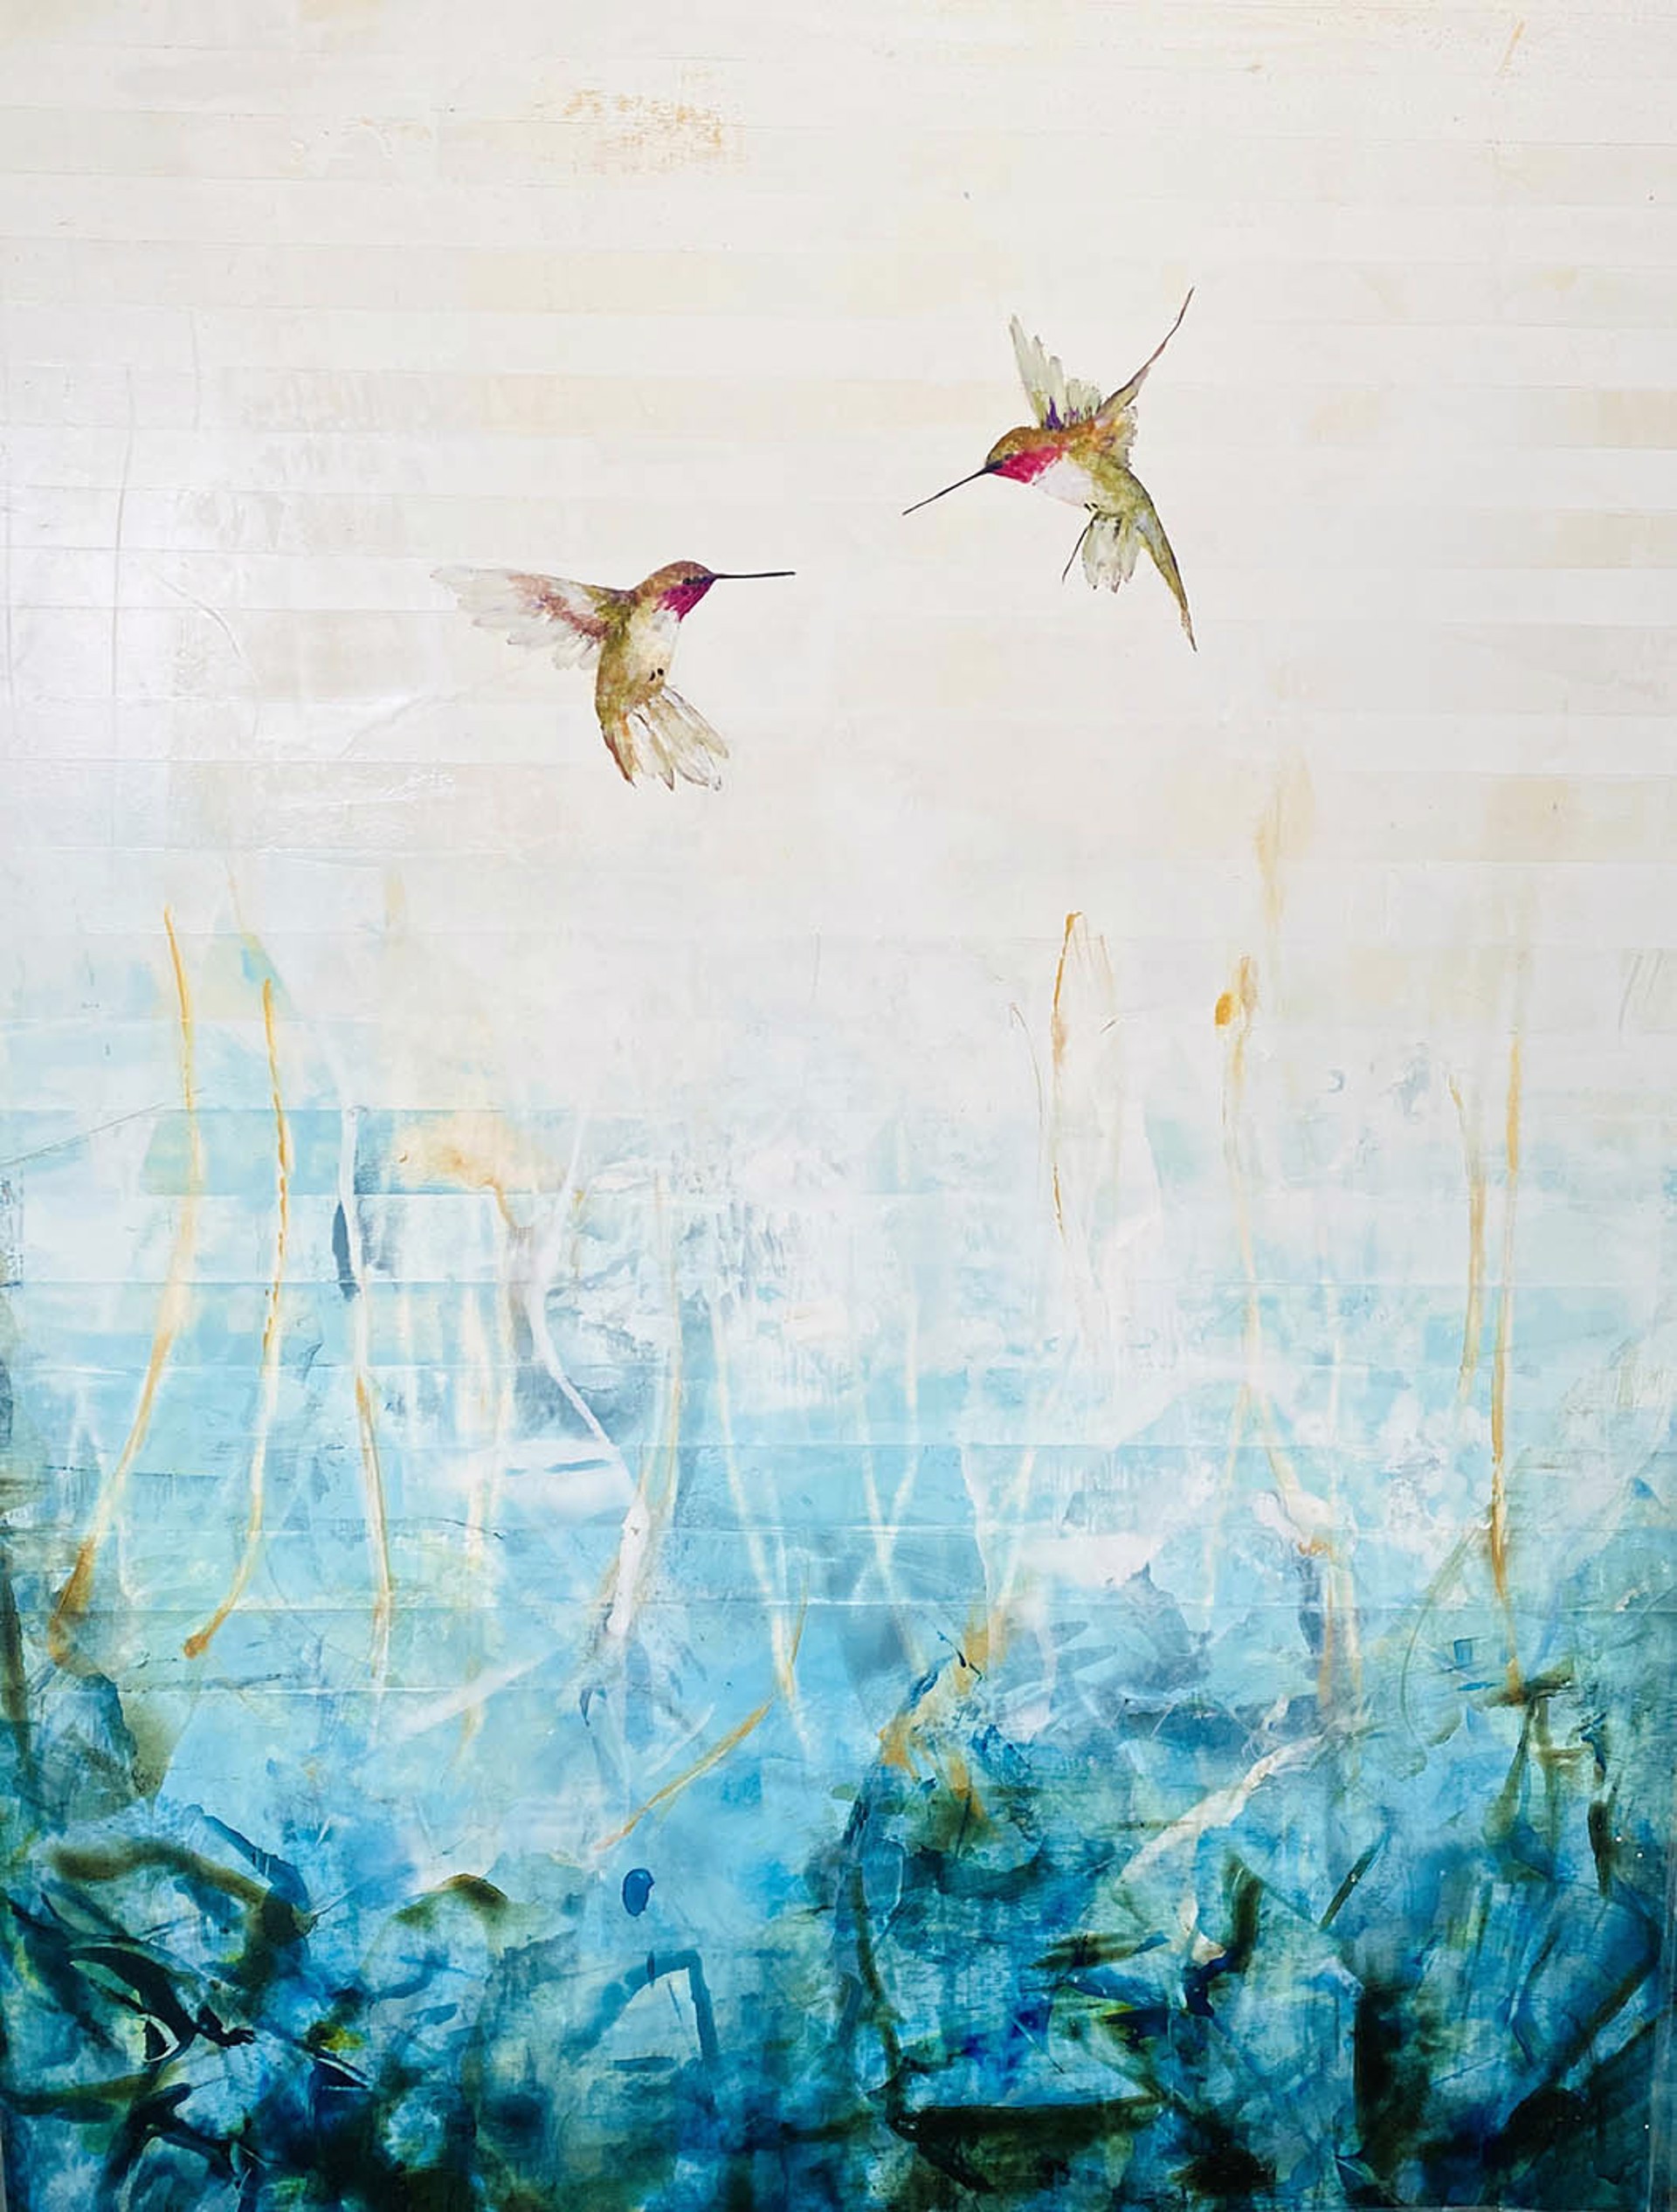 Original Oil Painting By Jenna Von Benedikt Featuring Two Ruby Throated Hummingbirds Facing Each Other In Flight Over Abstract Background In A Yellow To Turquoise Gradient 